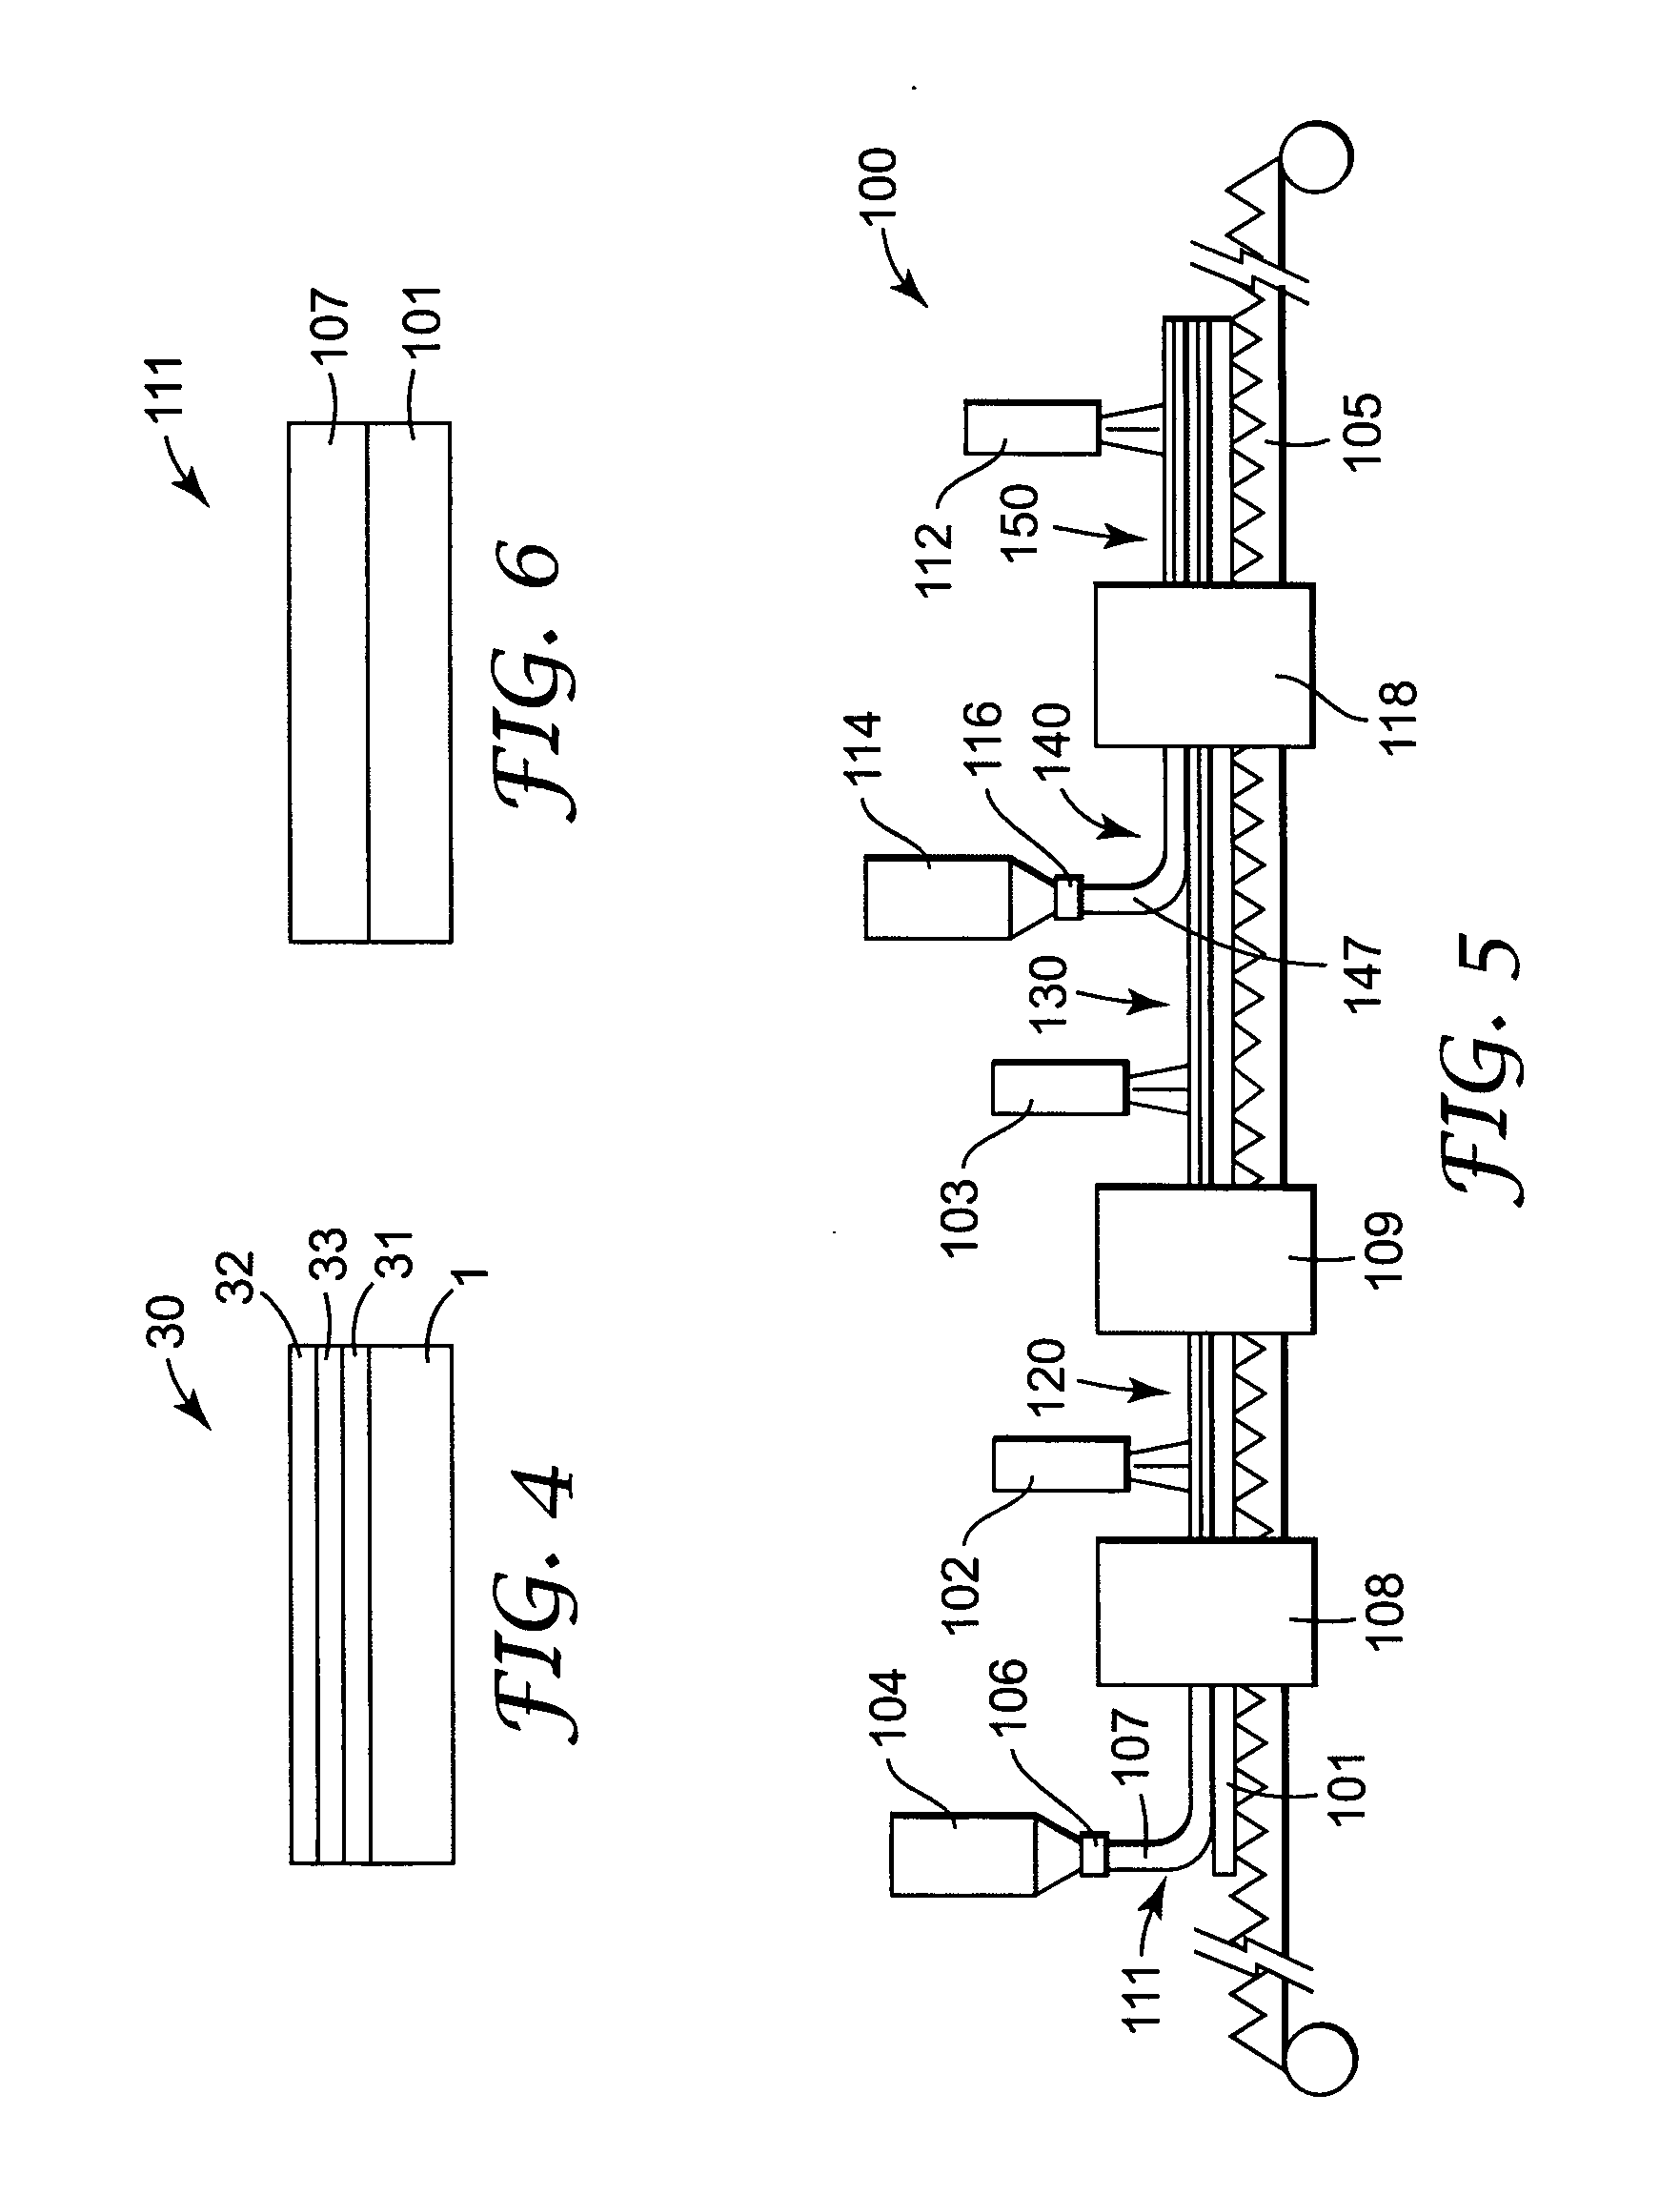 Multilayer cholesteric liquid crystal optical bodies and methods of manufacture and use